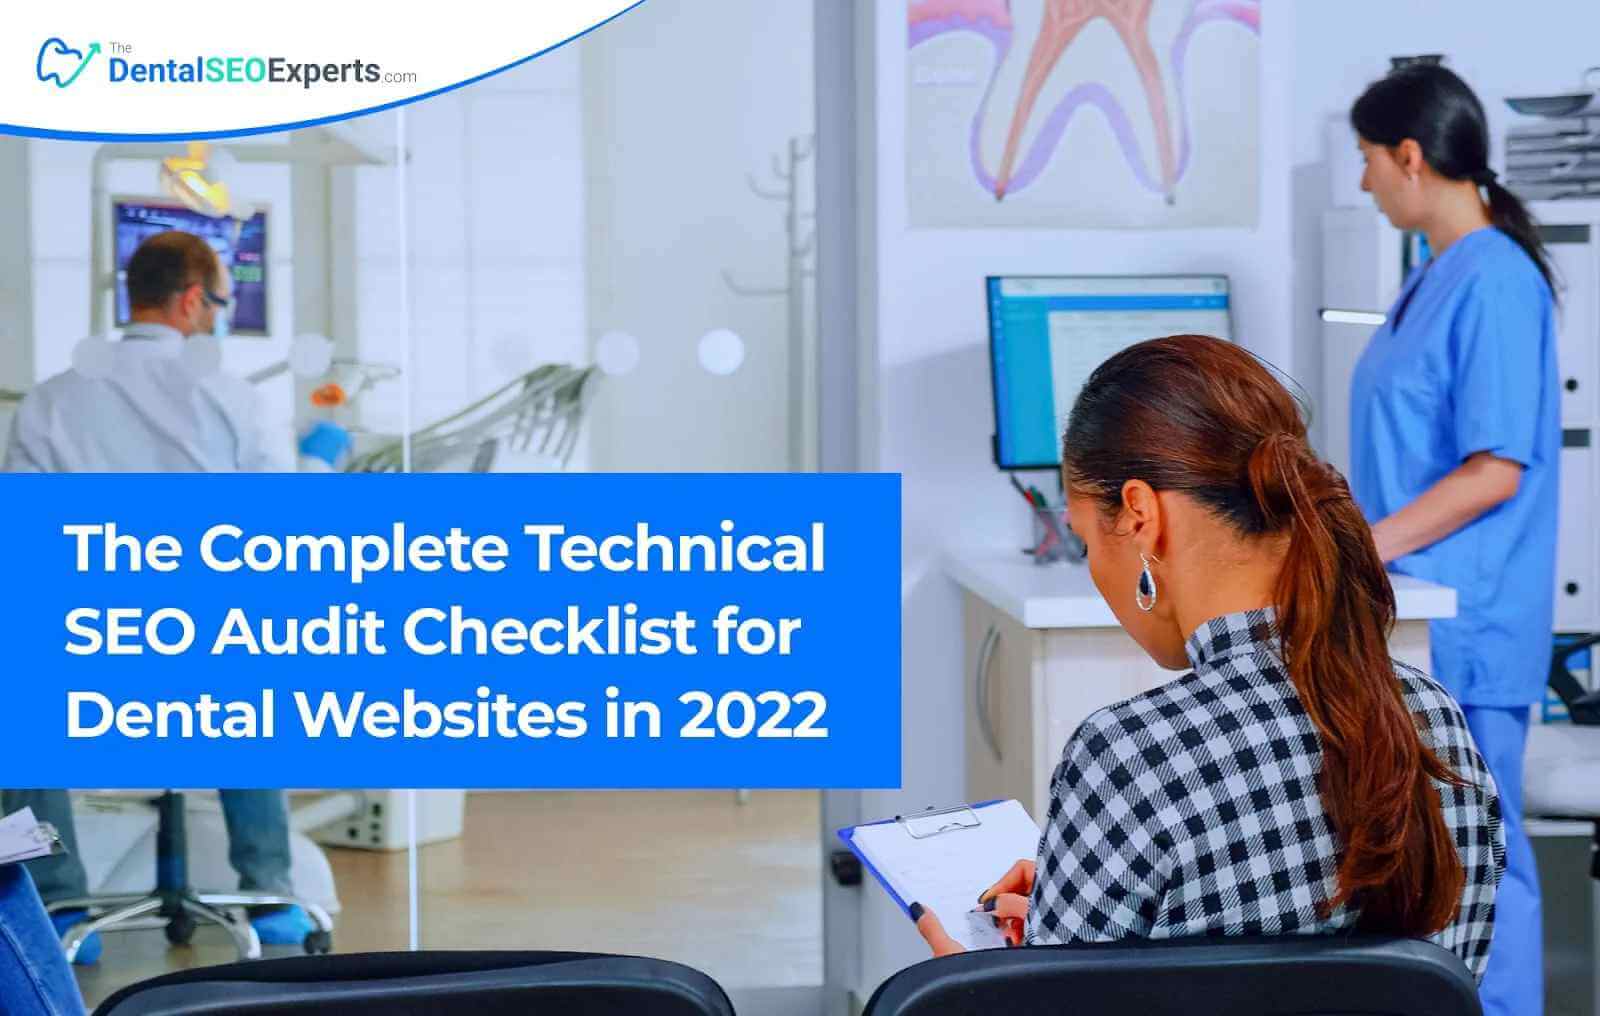 The Complete Technical SEO Audit Checklist for Dental Websites in 2022